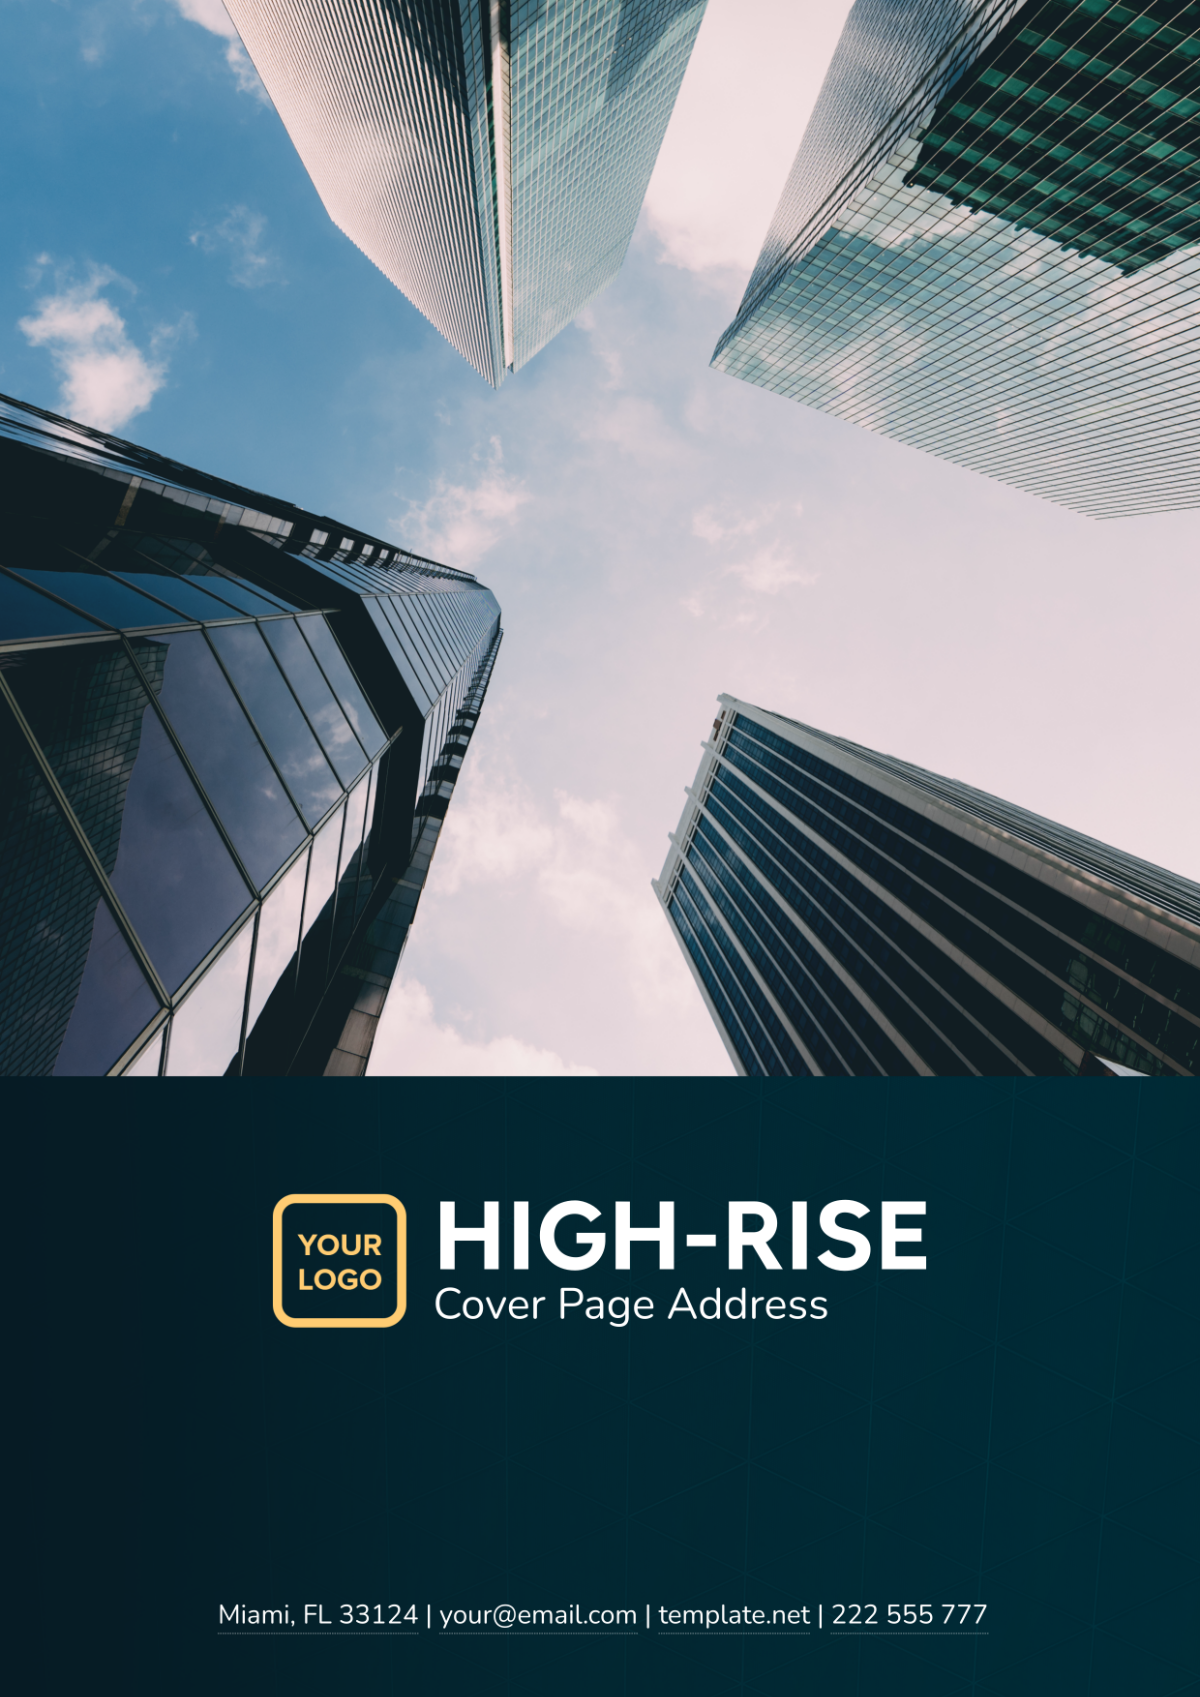 Free High-Rise Cover Page Address Template